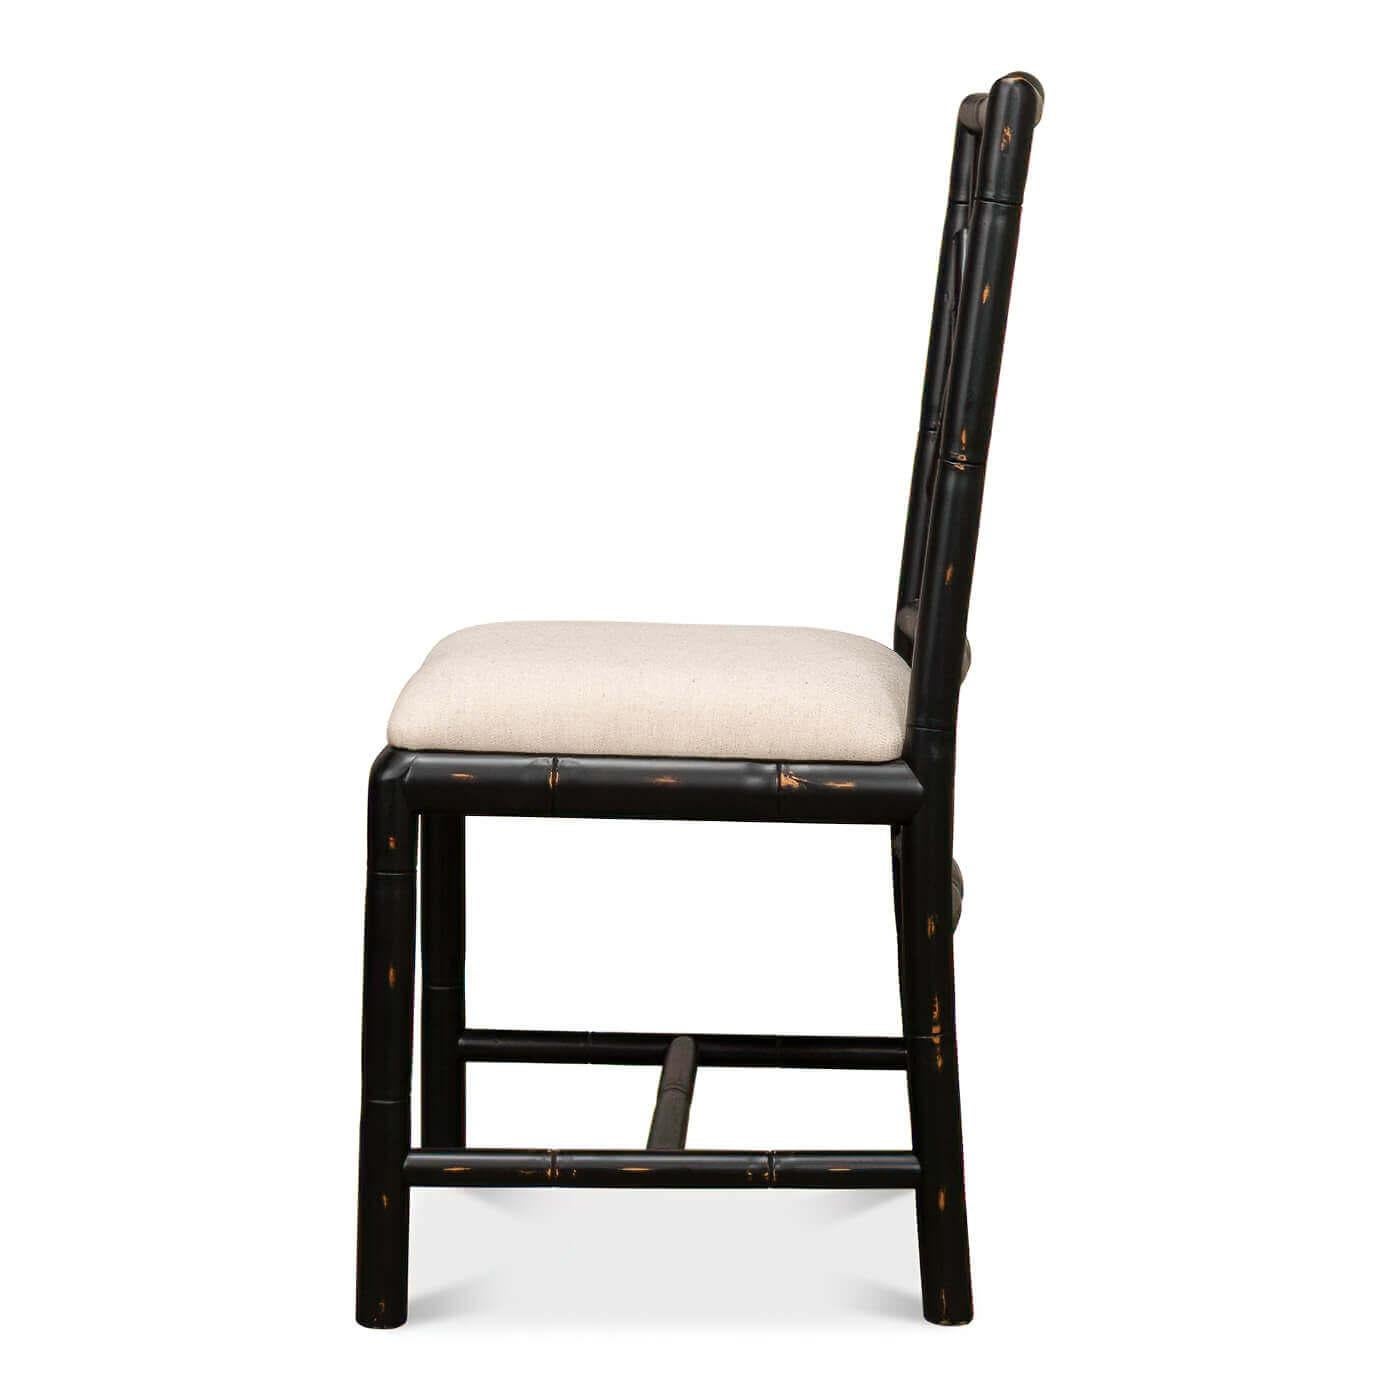 A Regency-style faux bamboo side chair. This hand-carved chair with a faux bamboo motif is inspired by designs of the Brighton Pavillion. It is shown in our black rubbed finish and a linen seat. 

Dimensions: 17